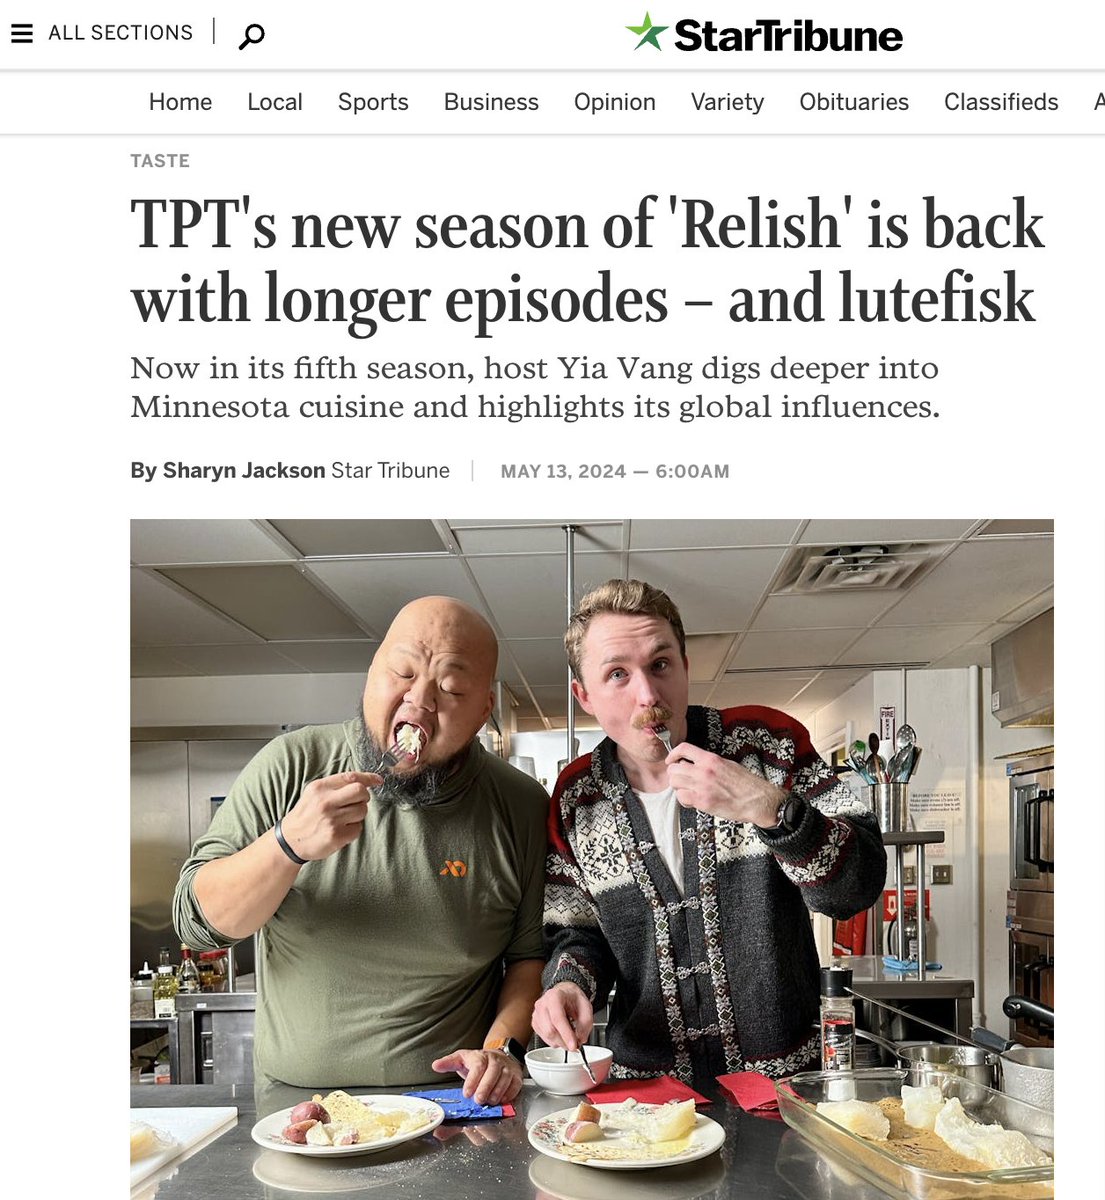 We're excited to have our new 'Relish' series with host @chefyiavang featured in today's @StarTribune Variety section! Embark on a culinary journey alongside local chefs and food makers by streaming 'Relish' for free on the PBS App or on tpt.org/relish.